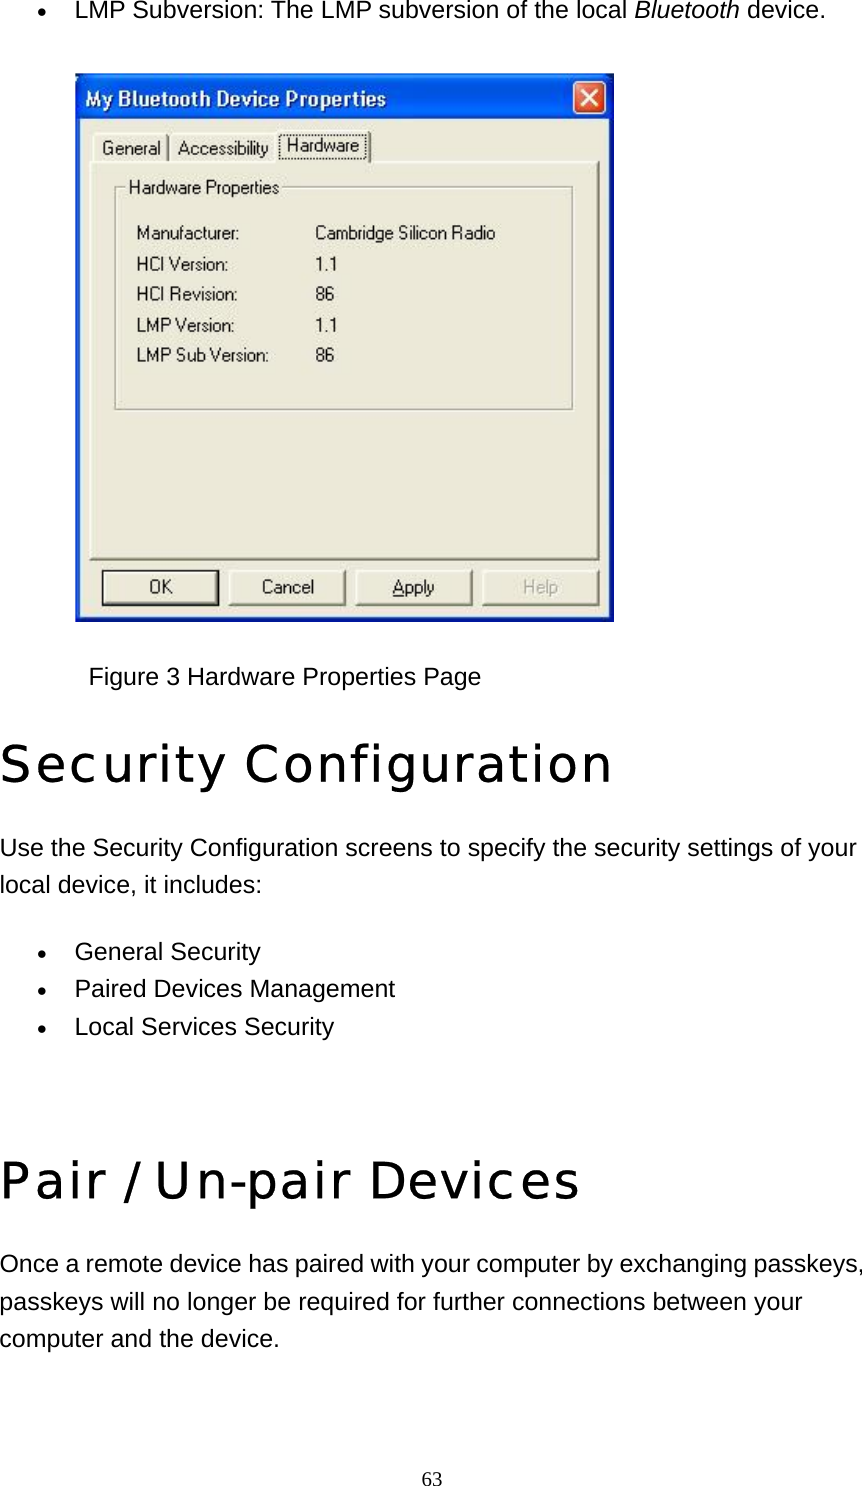   63• LMP Subversion: The LMP subversion of the local Bluetooth device.                Figure 3 Hardware Properties Page Security Configuration Use the Security Configuration screens to specify the security settings of your local device, it includes: • General Security   • Paired Devices Management   • Local Services Security     Pair / Un-pair Devices Once a remote device has paired with your computer by exchanging passkeys, passkeys will no longer be required for further connections between your computer and the device. 